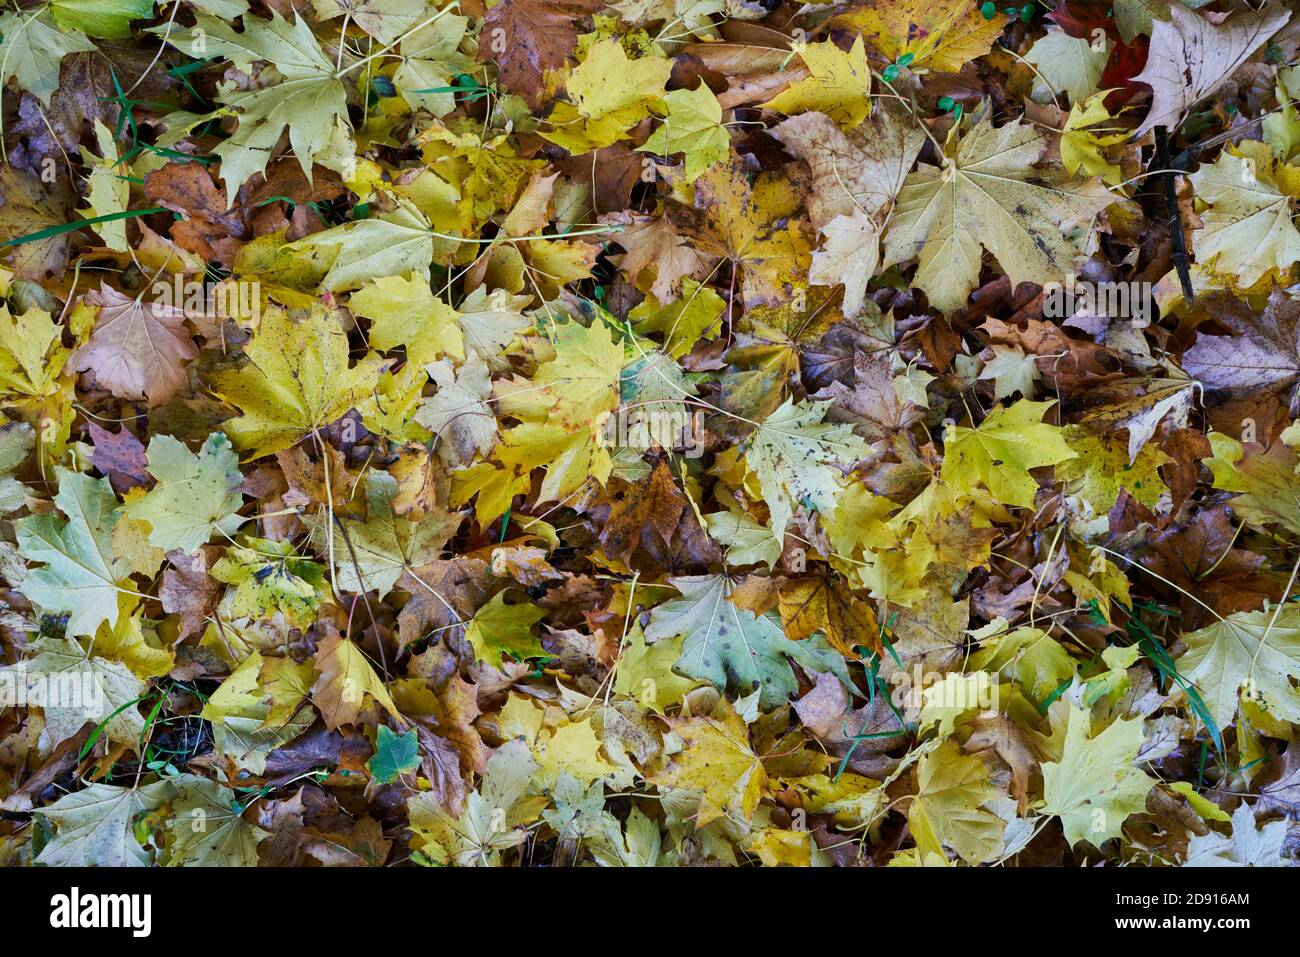 Leaves fallen to the ground. Stock Photo